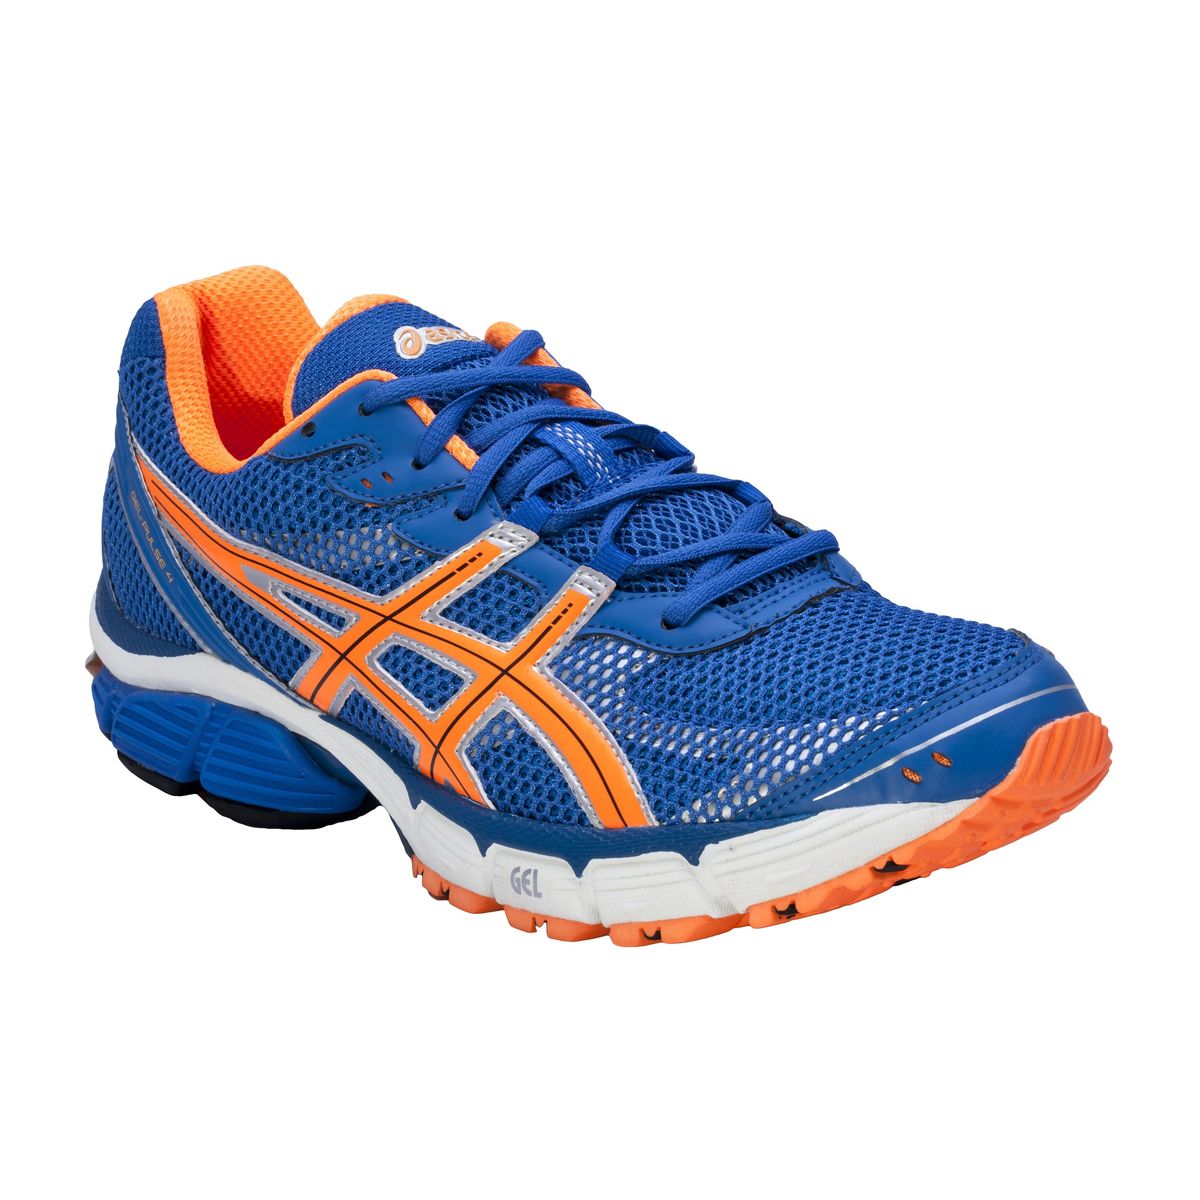 Buy asics gel pulse 4 \u003e Up to OFF49% Discounted